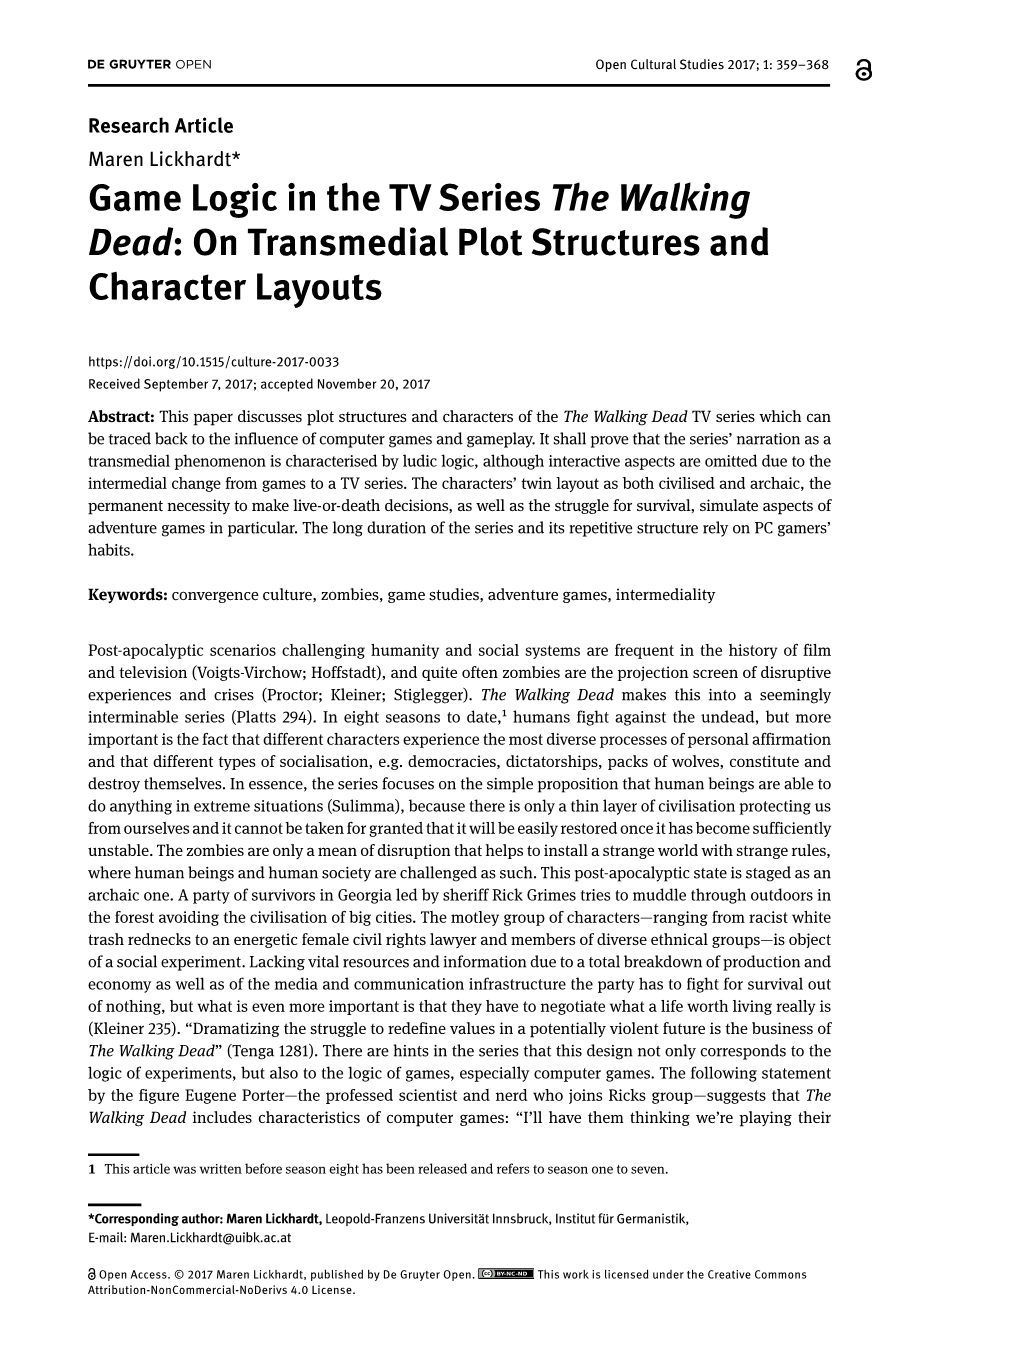 Game Logic in the TV Series the Walking Dead: on Transmedial Plot Structures and Character Layouts